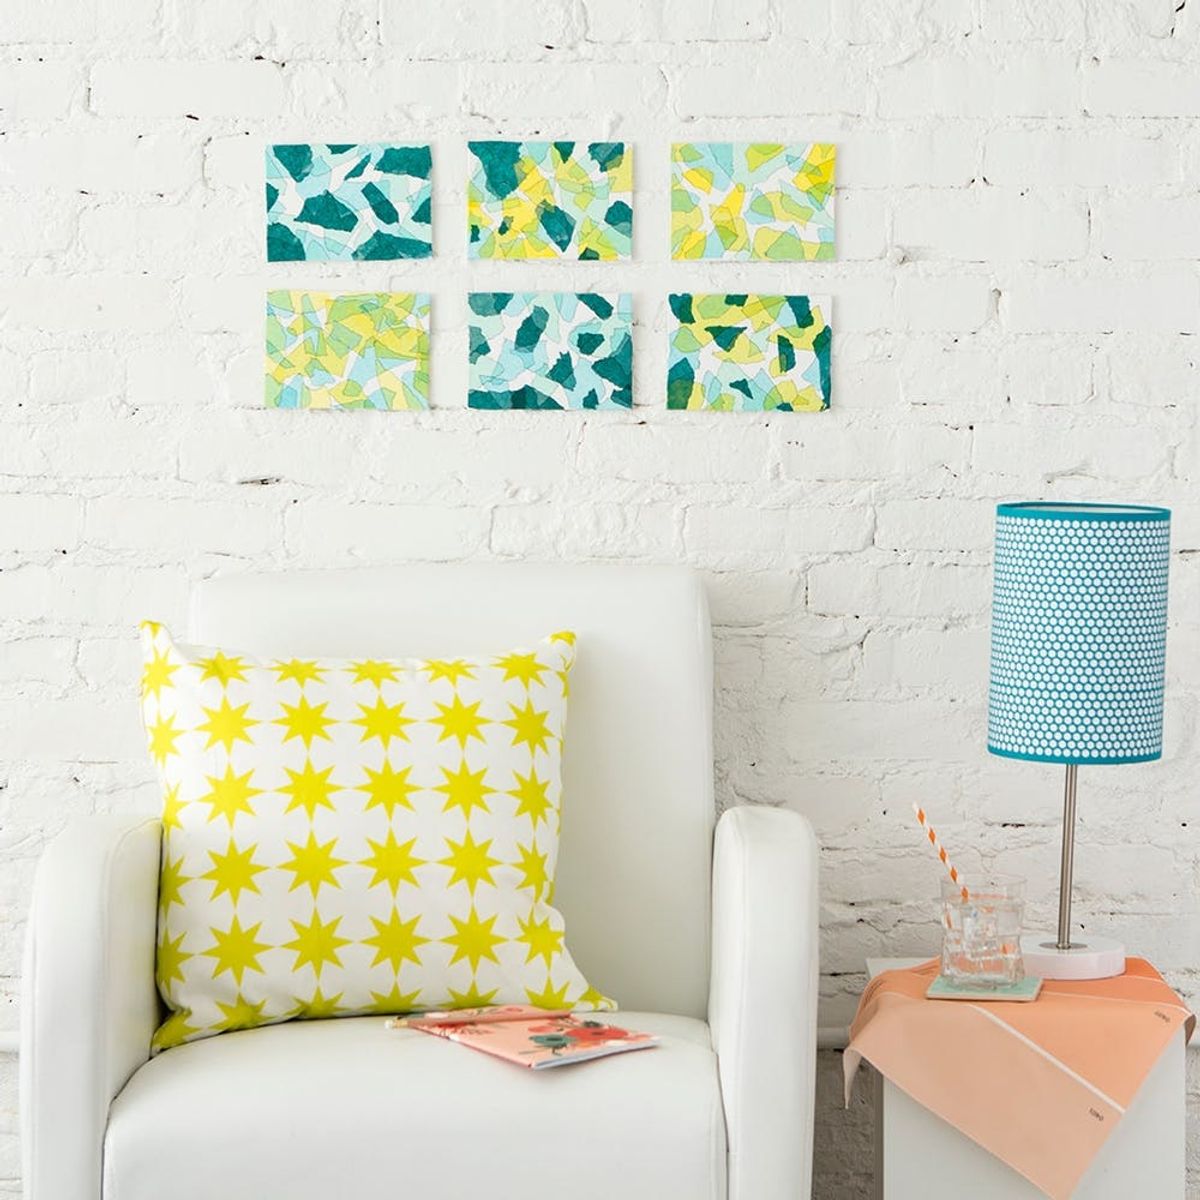 This Is the Easiest *and* Cheapest Way to Make Wall Art